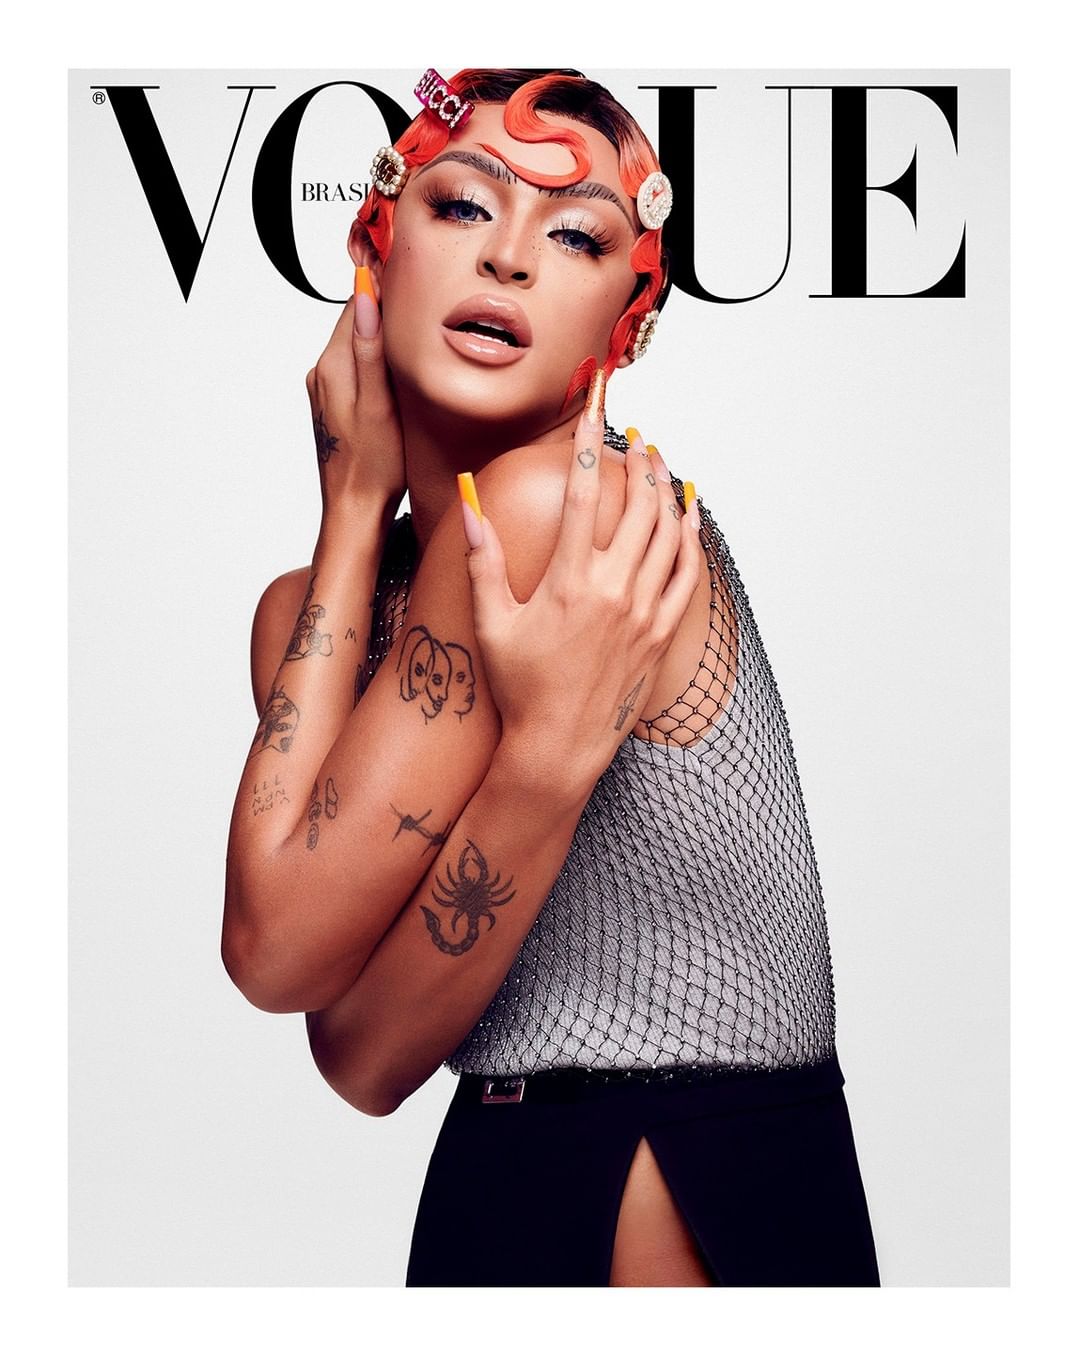 Gucci Official - On the covers of @VogueBrasil’s October issue, @pabllovittar, @gloriagroove, @biancadellafancy and @halessiar are captured wearing looks and accessories from #GucciPreFall20 by @aless...